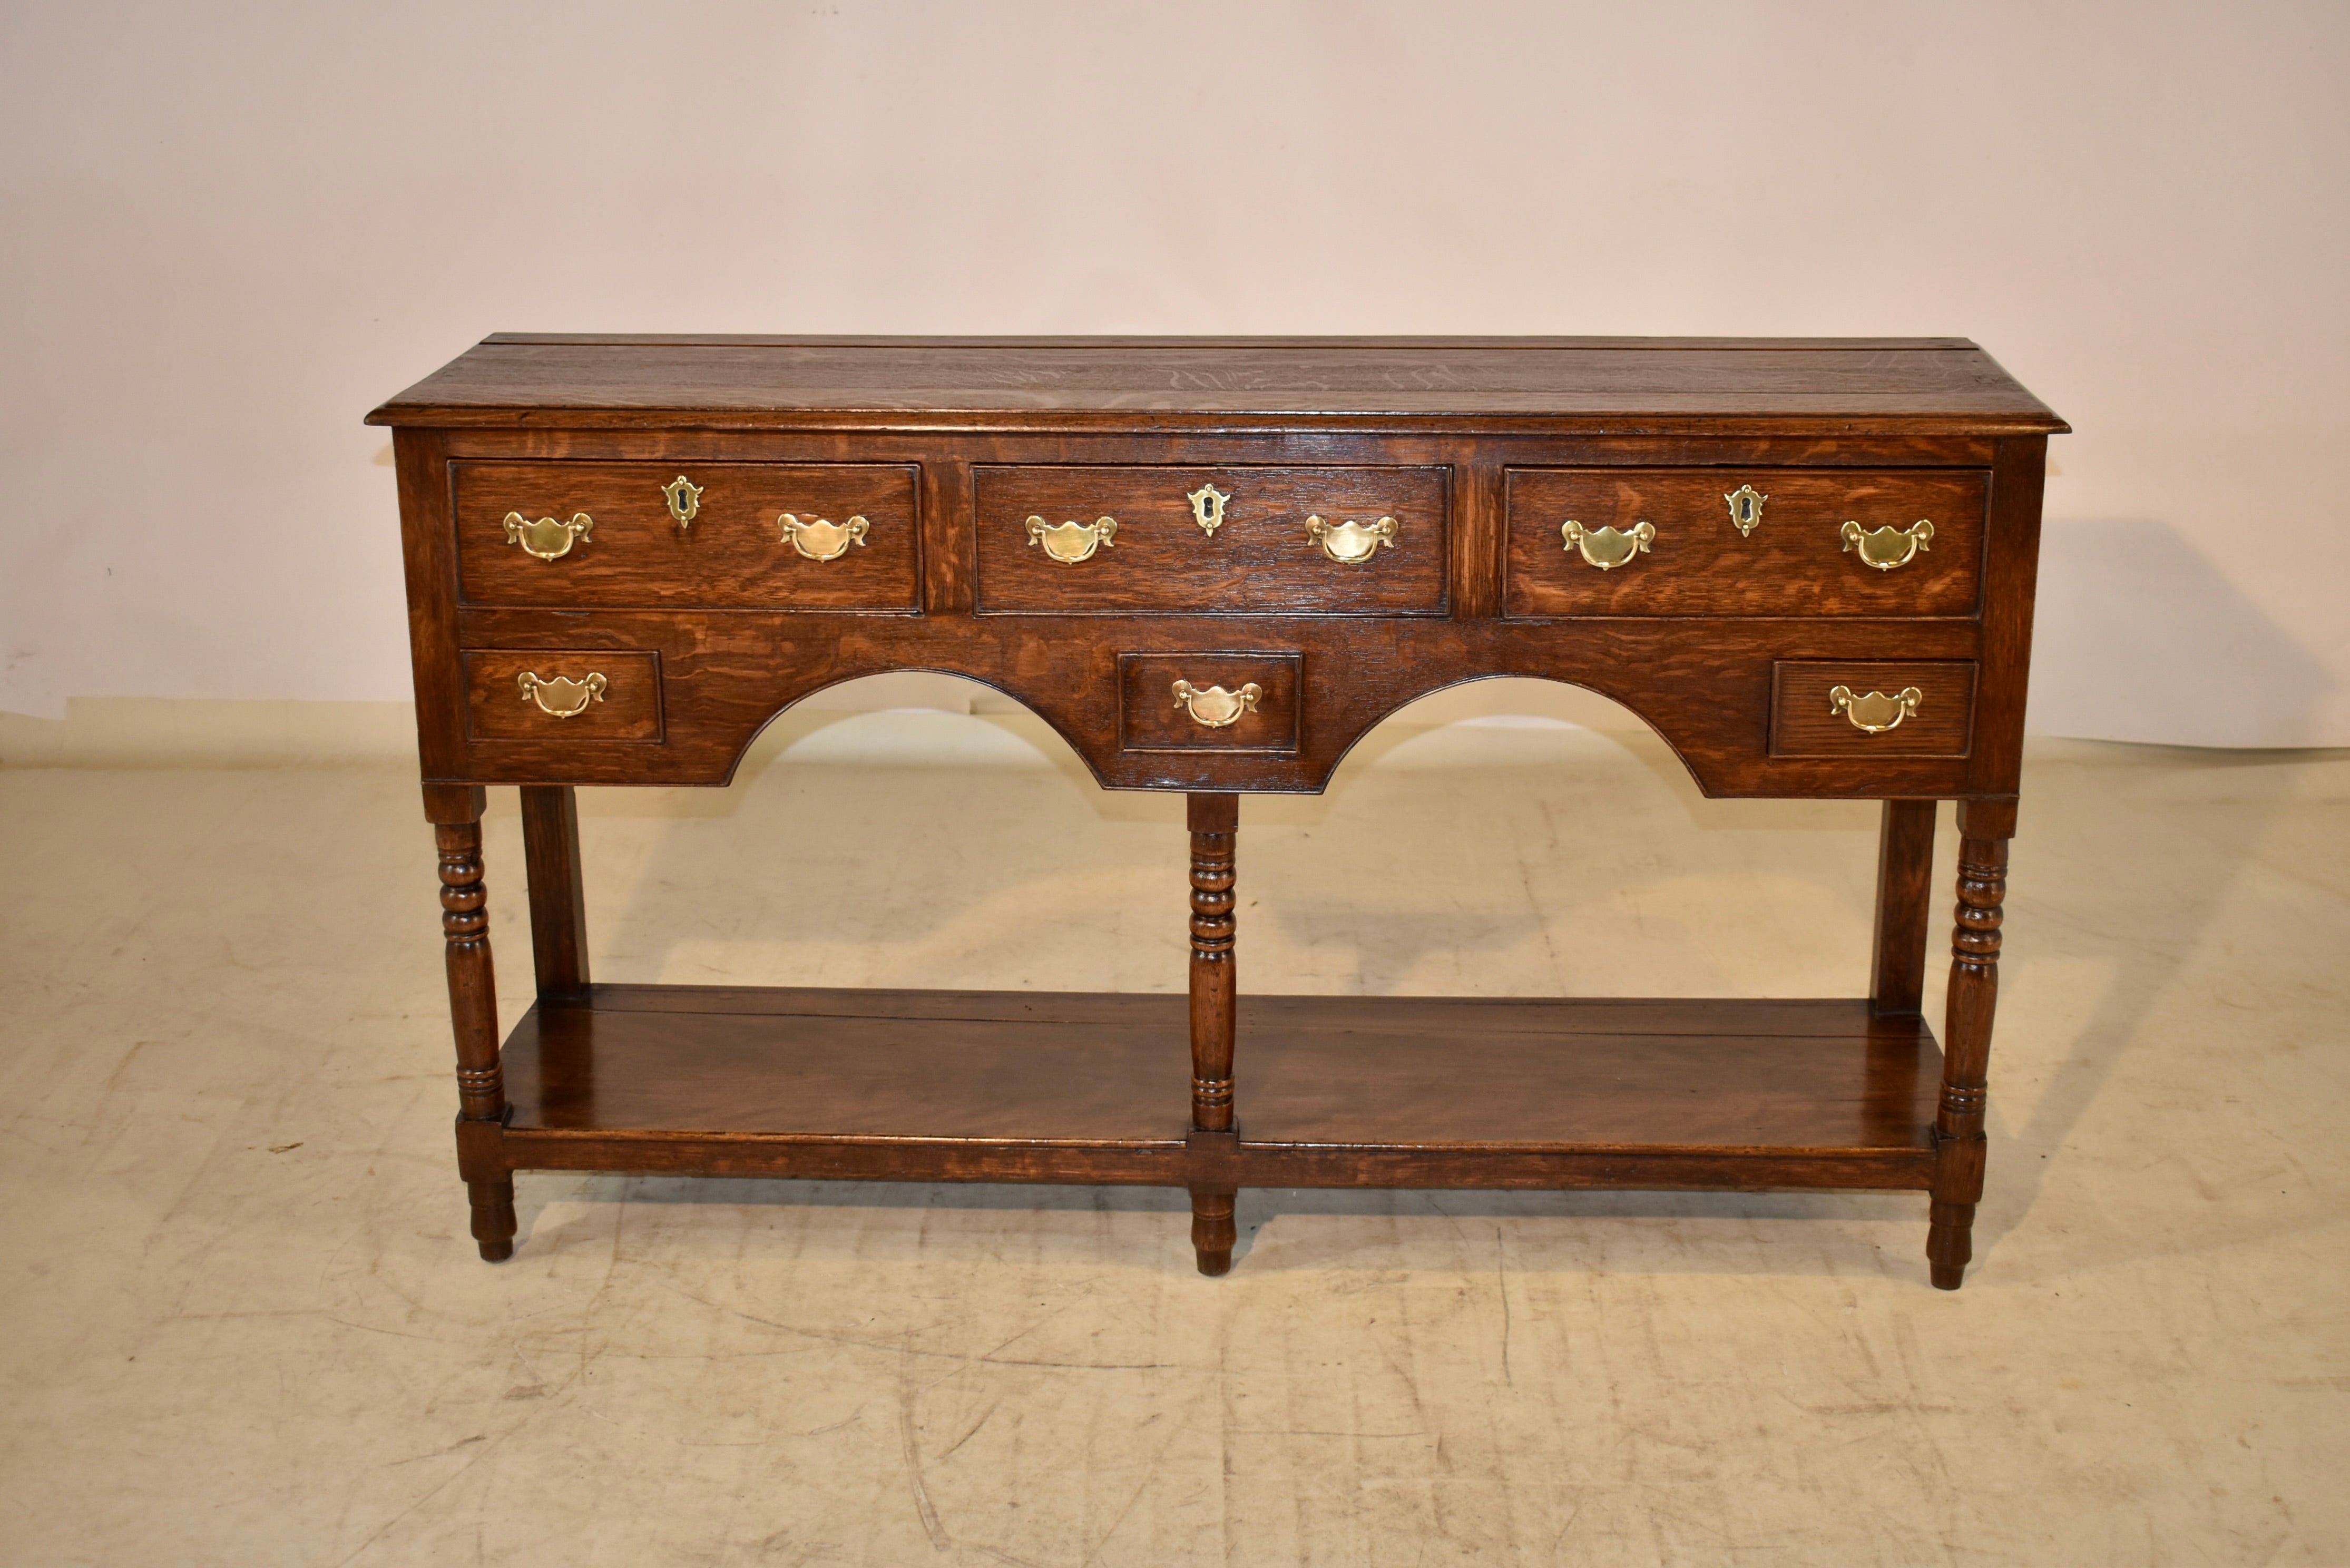 18th century oak sideboard from England with a beveled edge around the top and a plate rail. The top follows down to simple sides and three larger drawers over three smaller drawers in the front of the piece. It is supported on simple legs in the